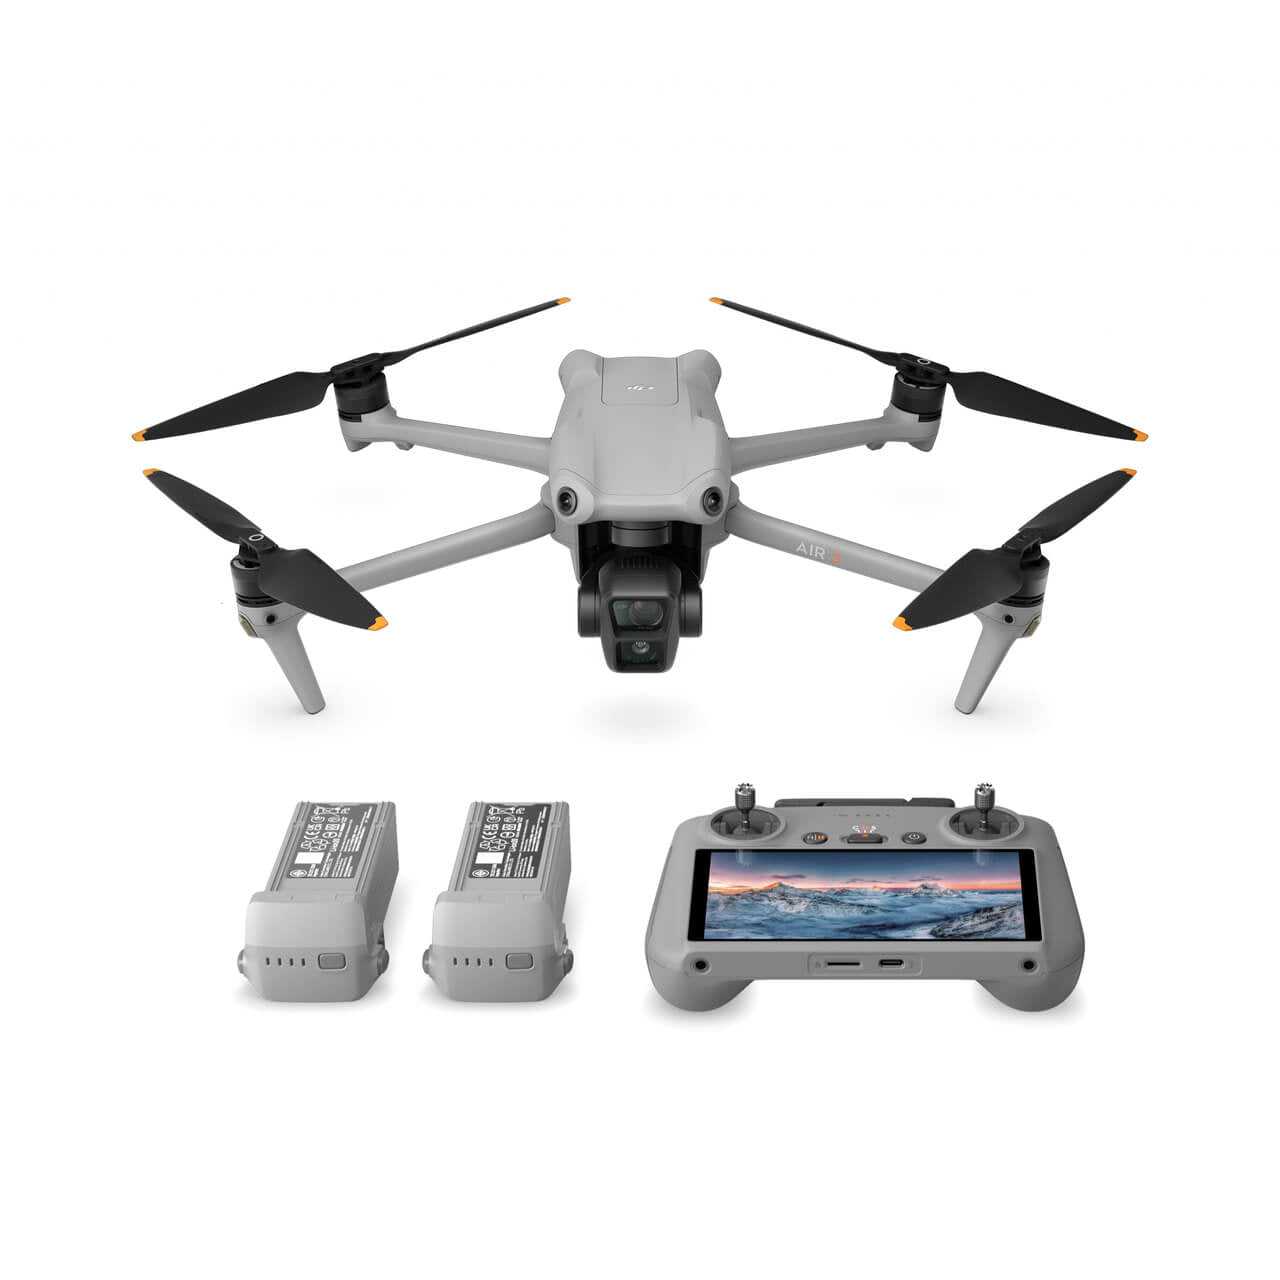 DJI Air 3 Drone and Fly More Combo